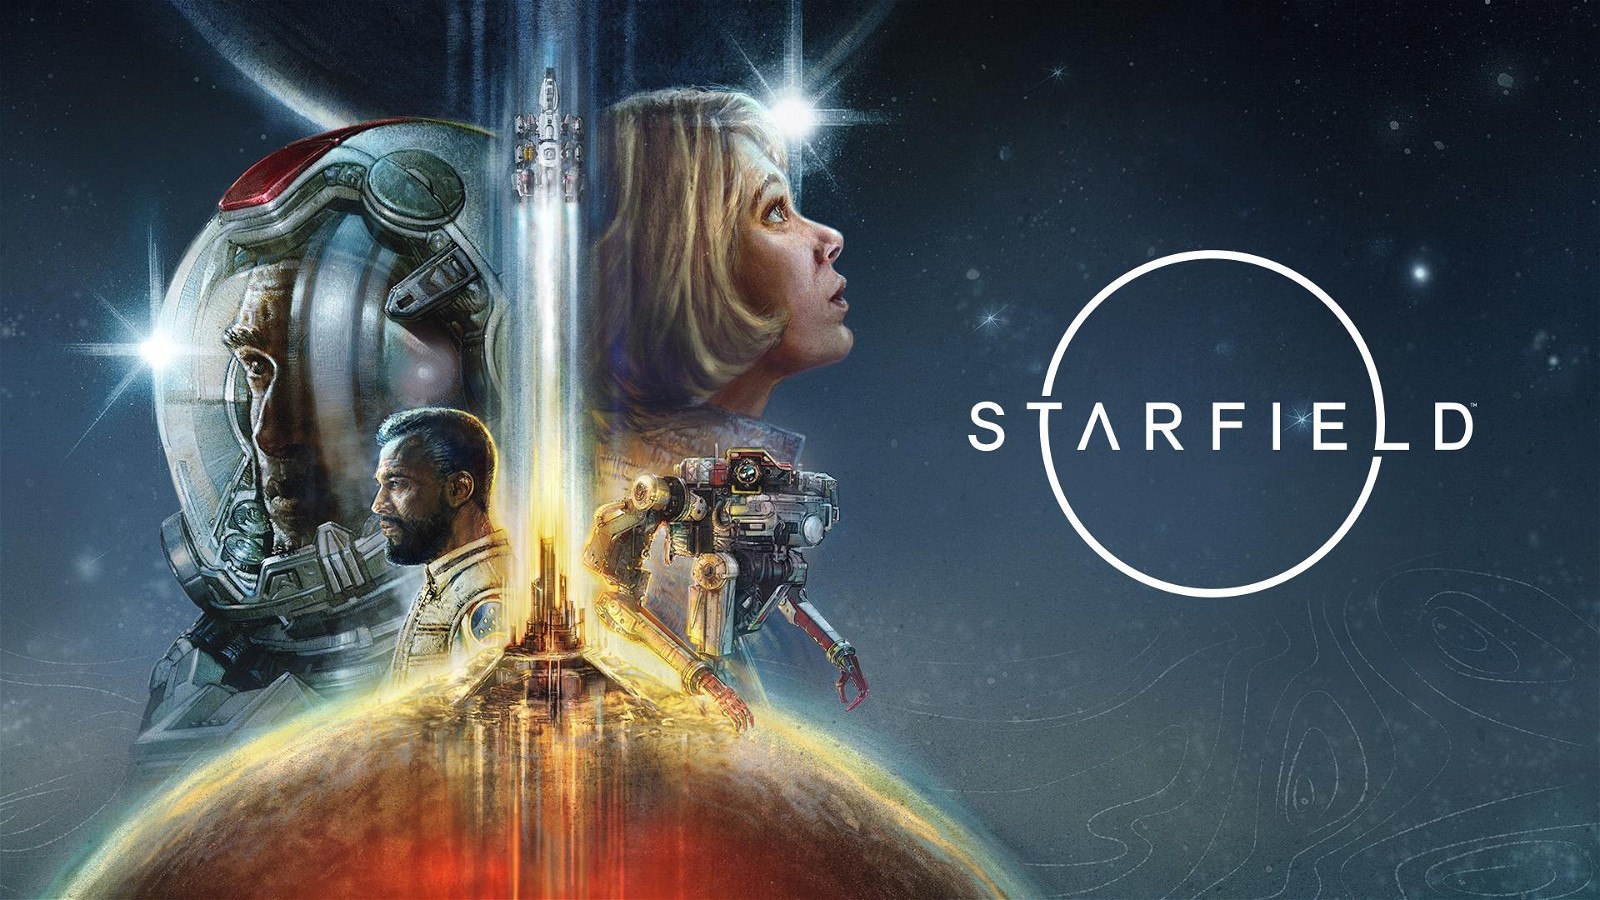 Starfield is The Most Anticipated Game of 2023